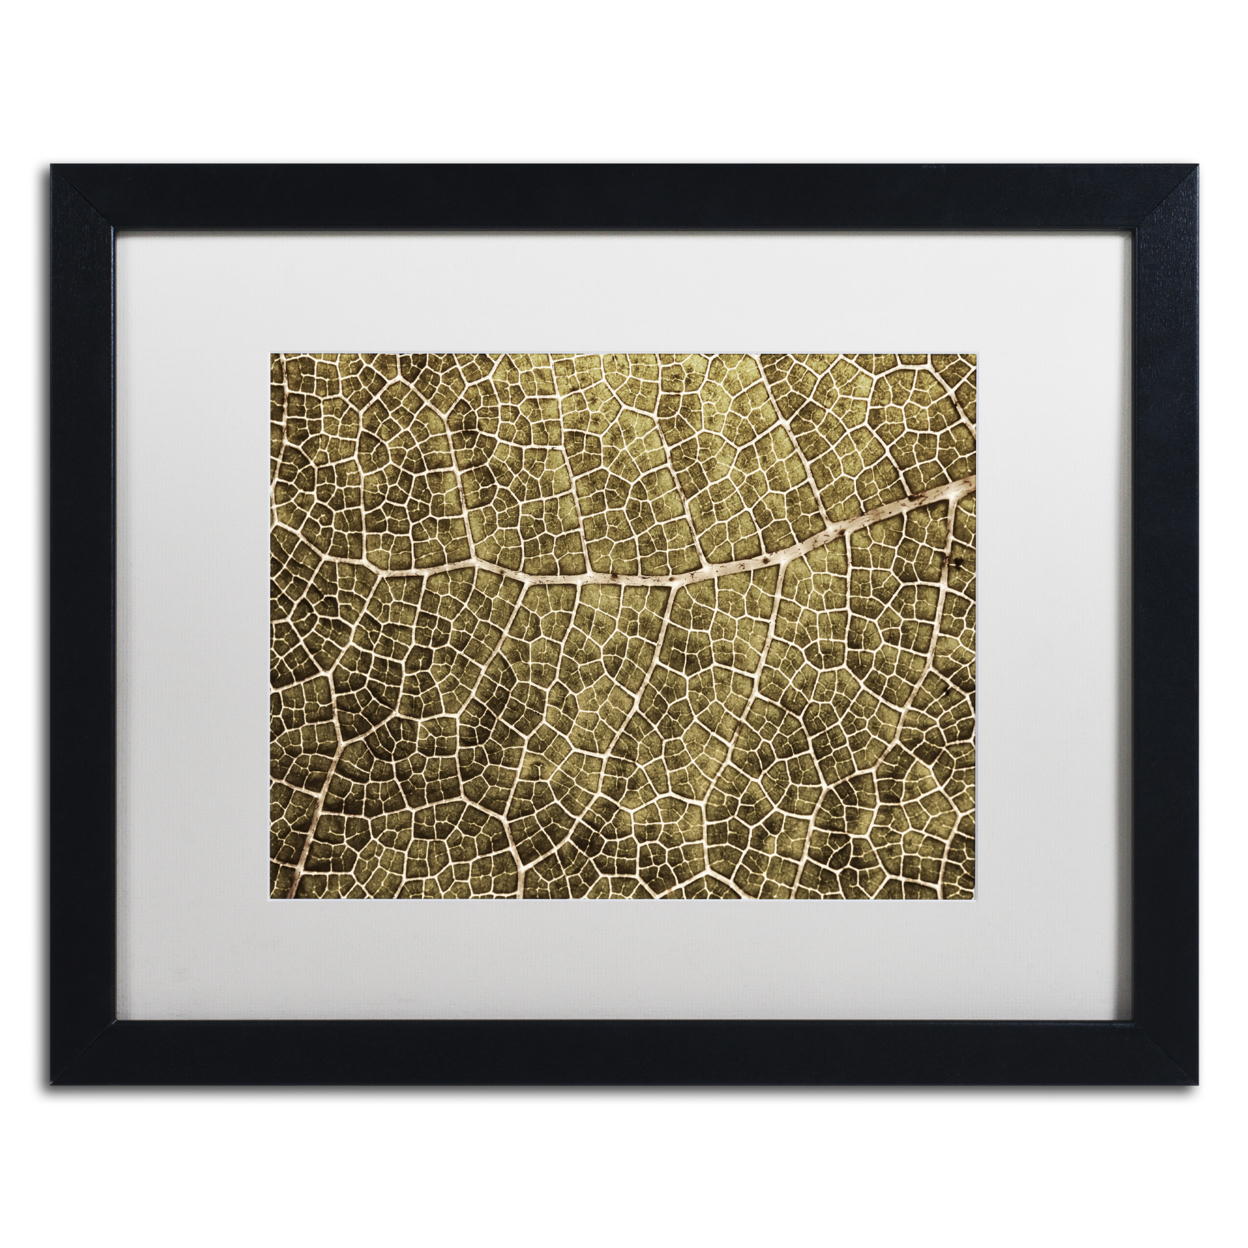 Cora Niele 'Sepia Leaf Texture' Black Wooden Framed Art 18 X 22 Inches